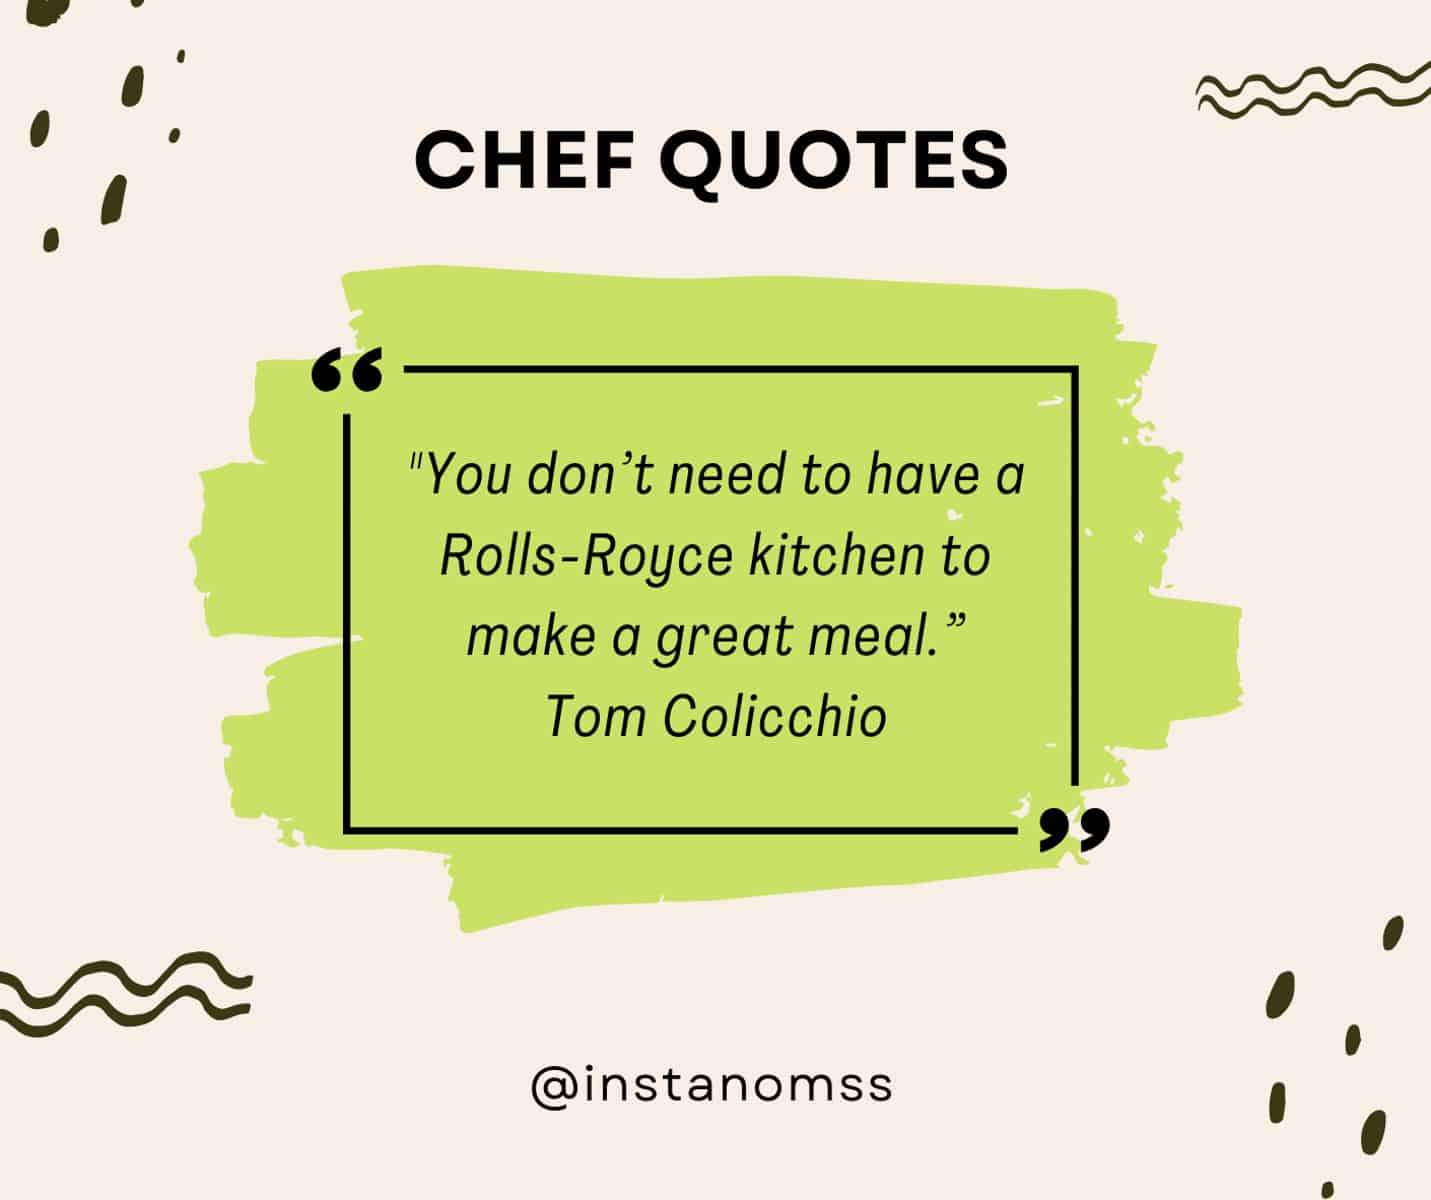 "You don’t need to have a Rolls-Royce kitchen to make a great meal.” Tom Colicchio